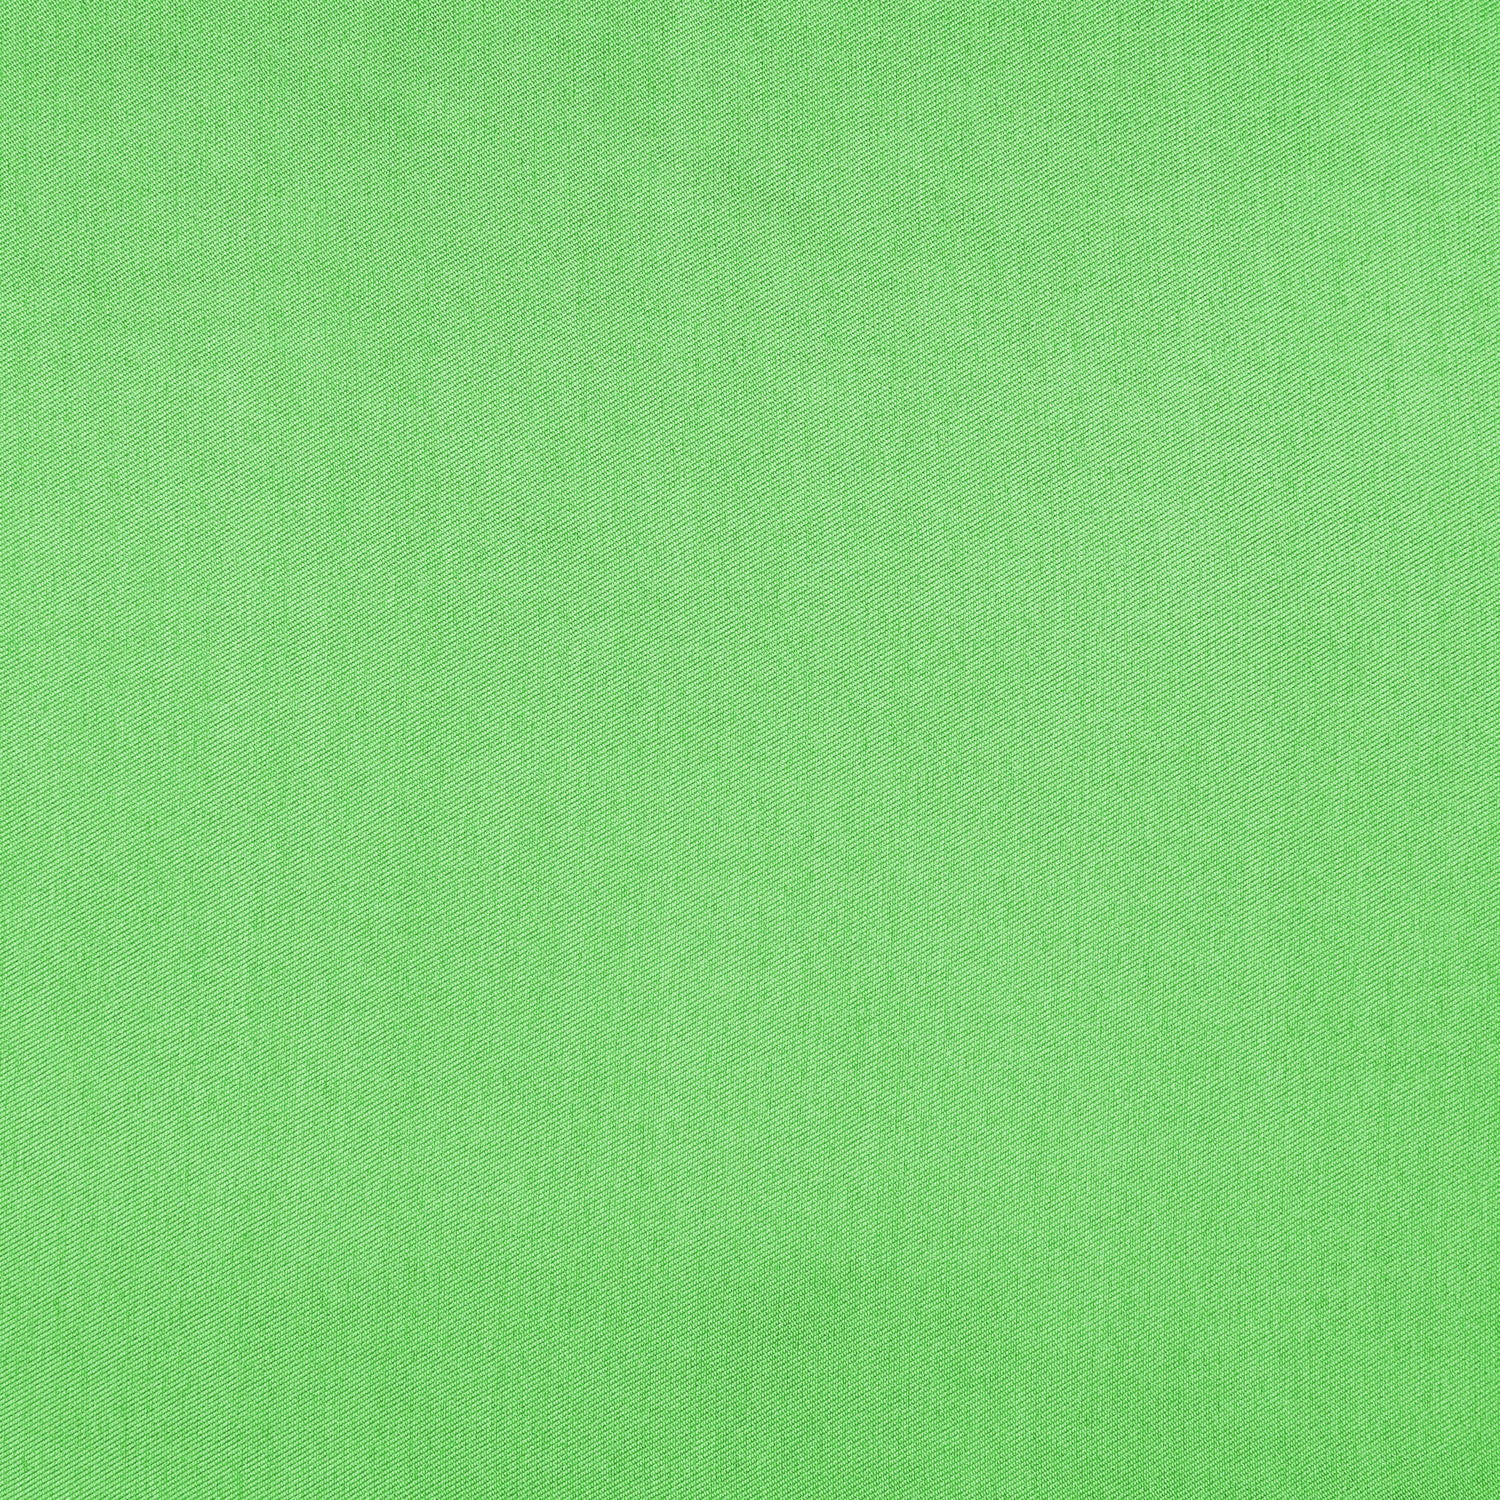 Yard 1 Sewing, Satin ZELOUF DIY, Crafts The Twill, Yard, Mikado Sherbet, Lime Fabric By